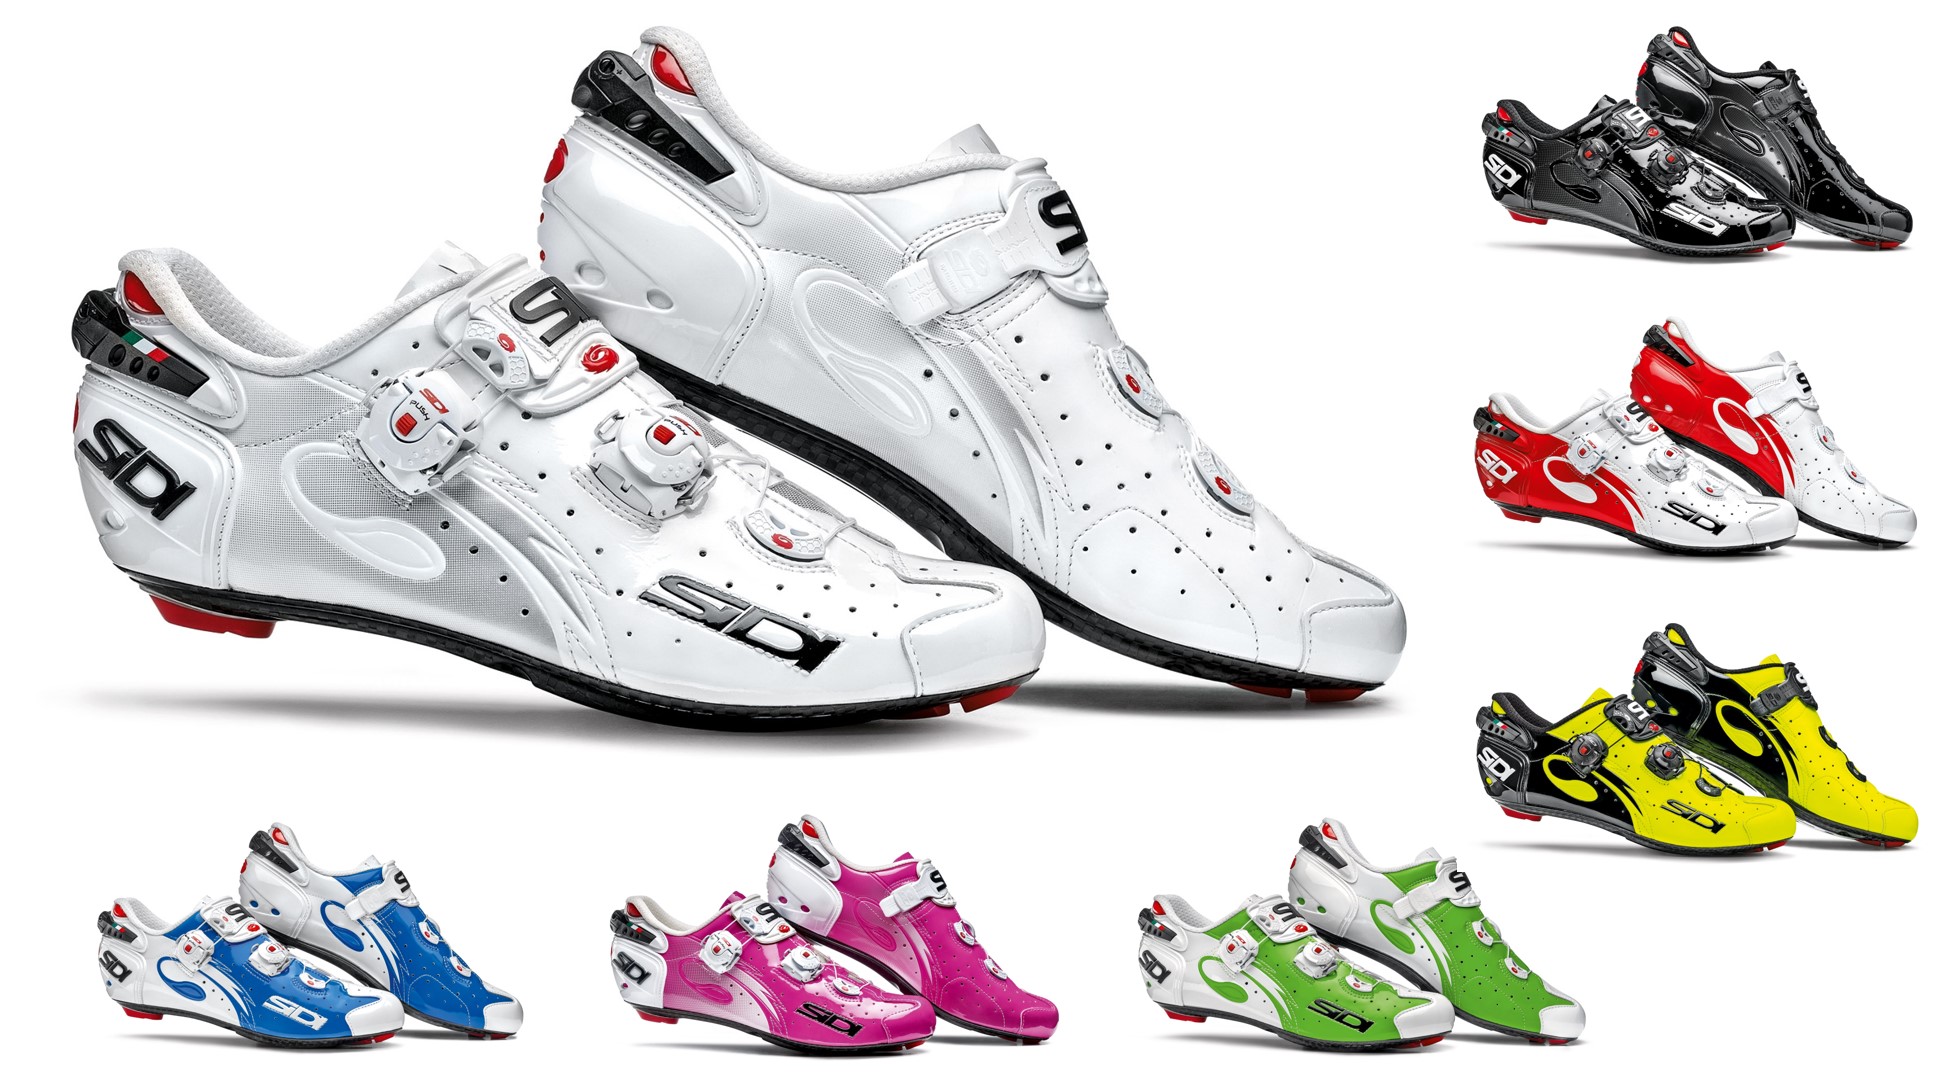 Sidi Carbon Wire Road Cycling Shoes